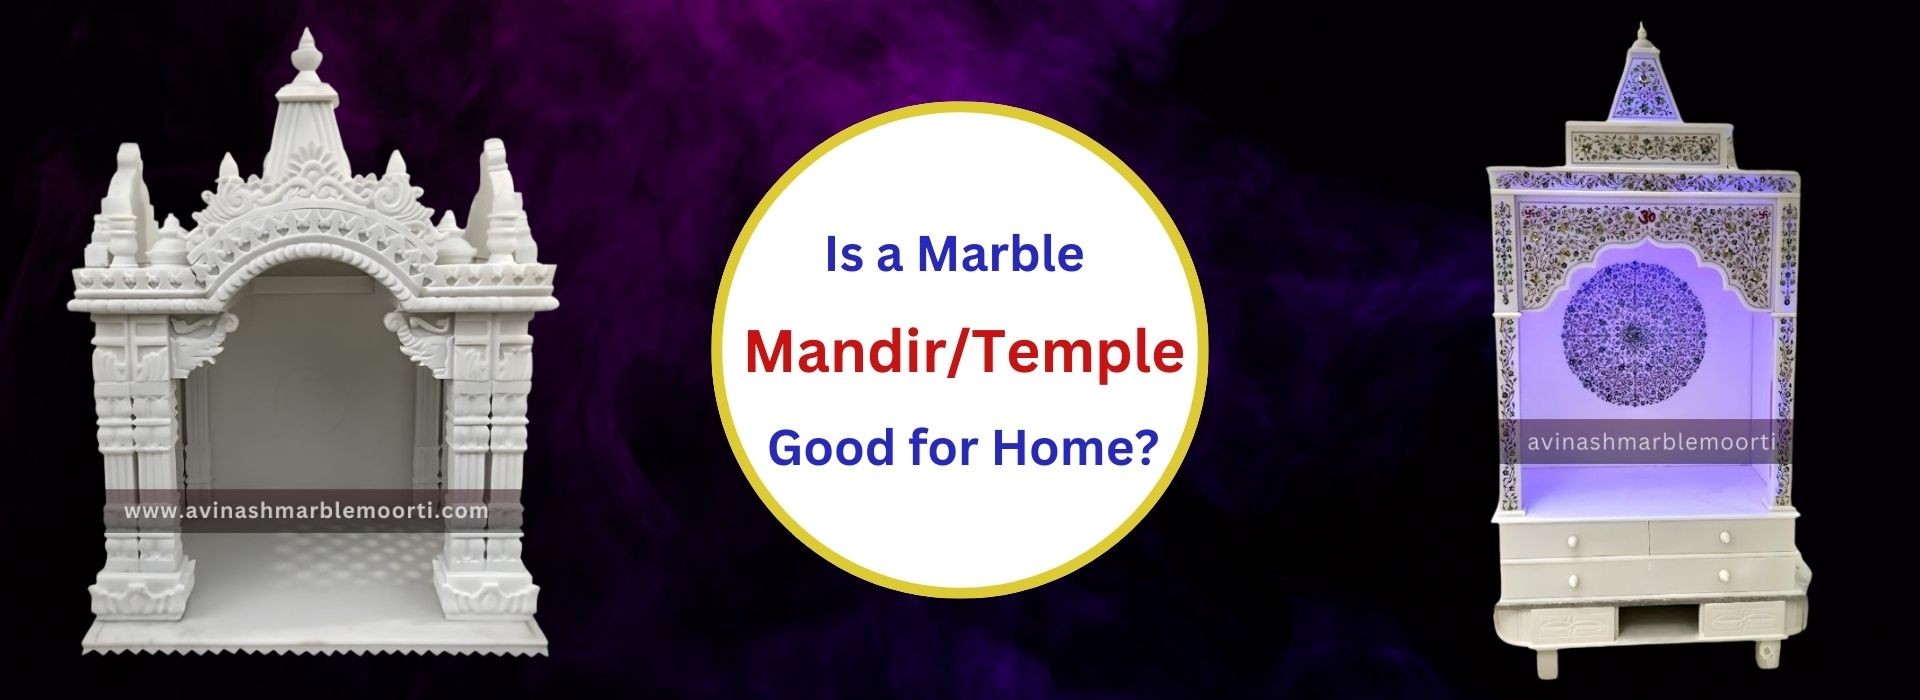 Is a Marble Mandir/Temple Good for Home?